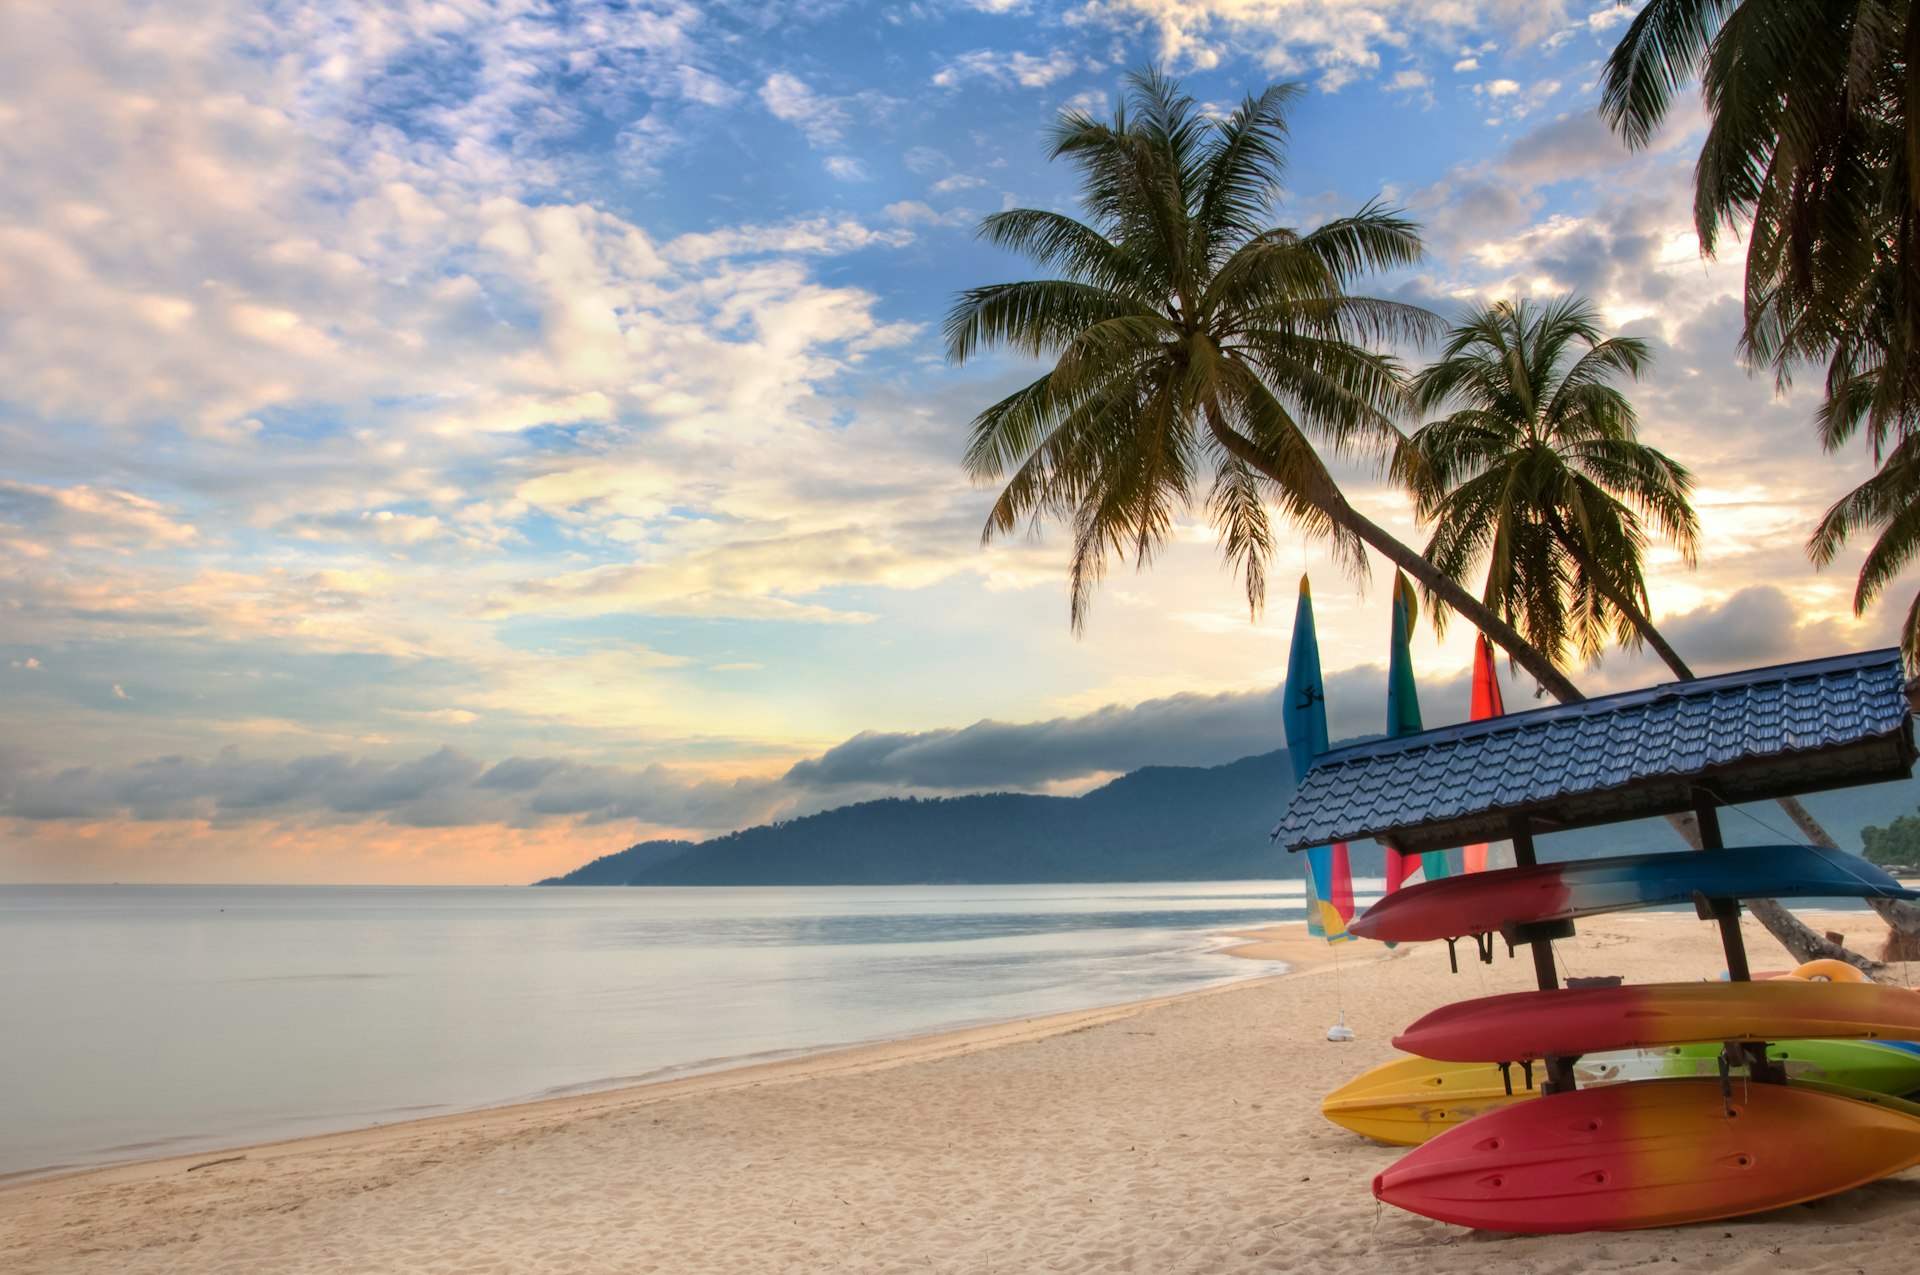 A deserted beach with palms and stored boats on Tioman Island, as the sunrise creates pink and light-blue light